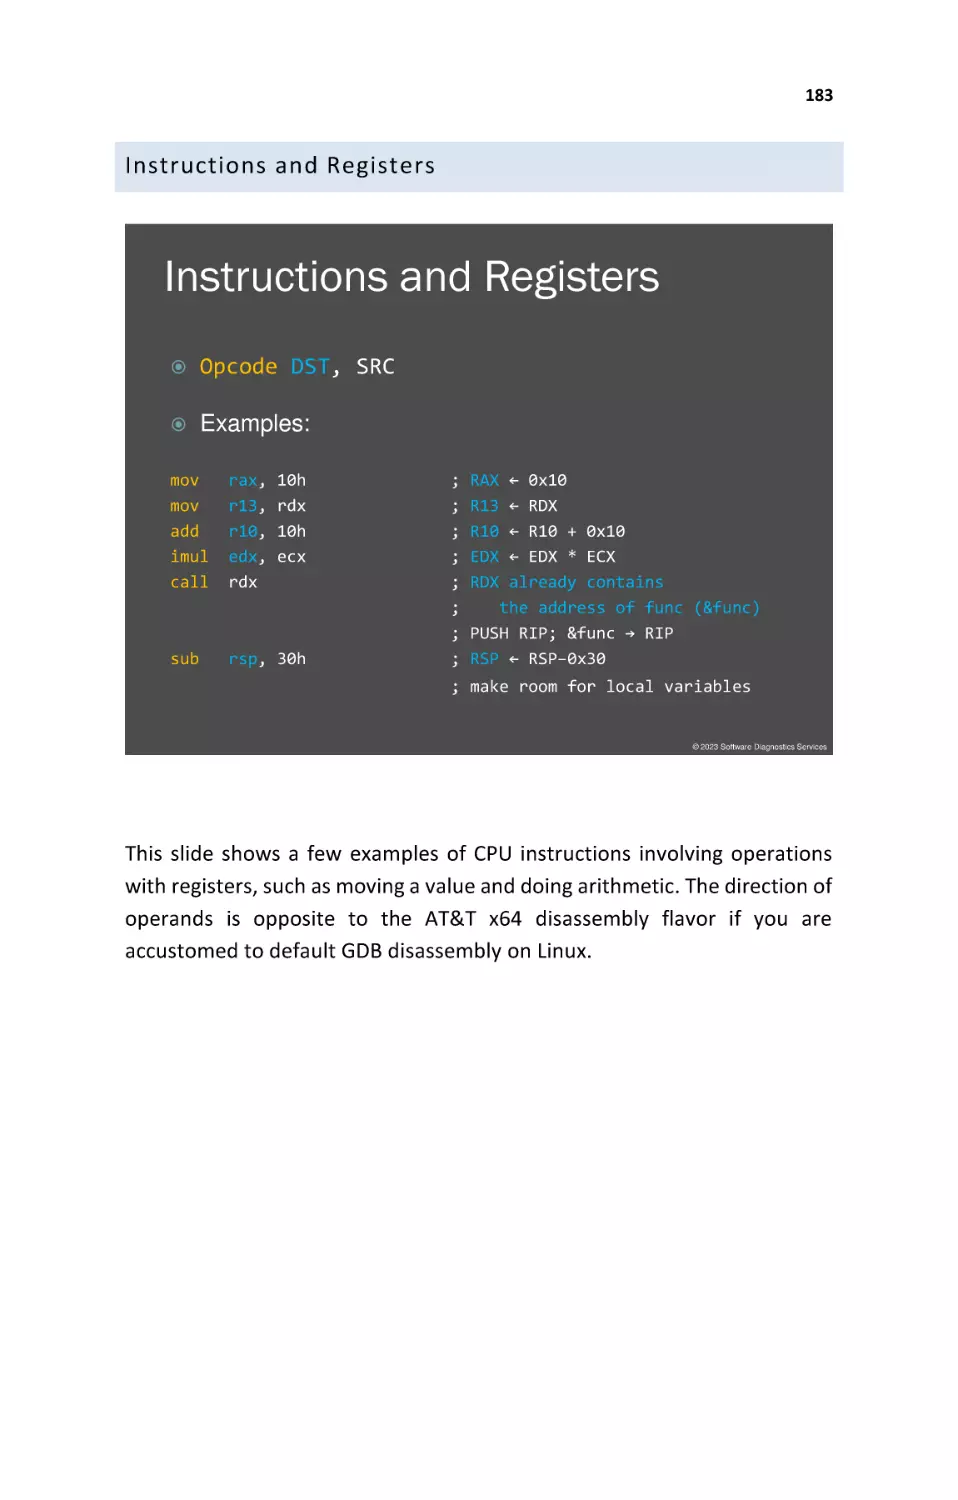 Instructions and Registers